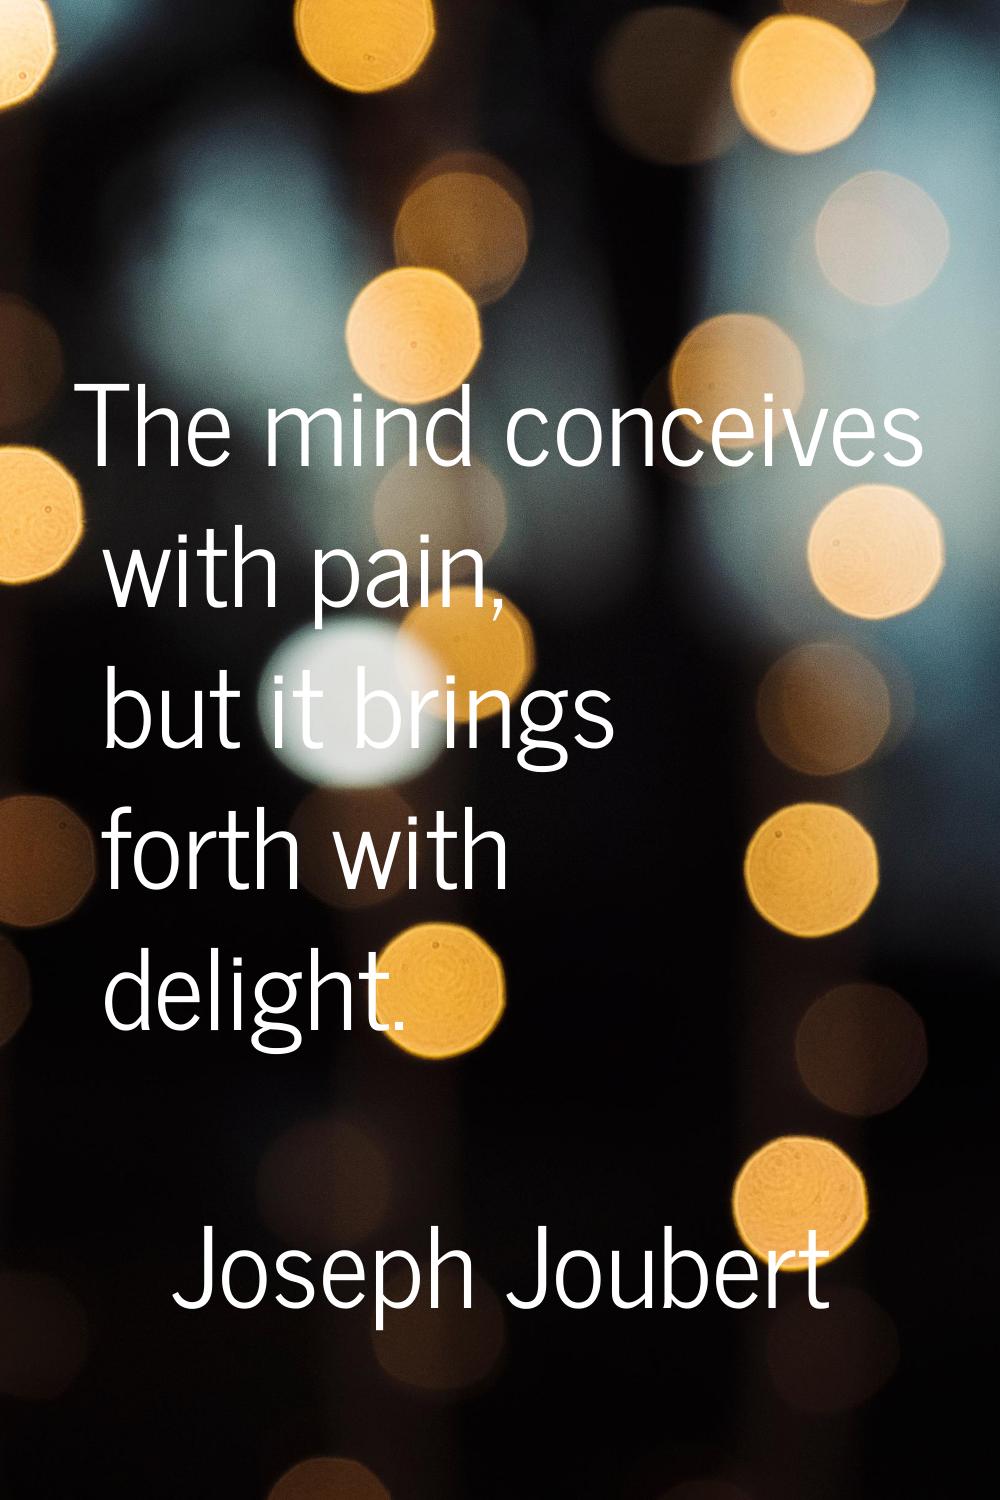 The mind conceives with pain, but it brings forth with delight.